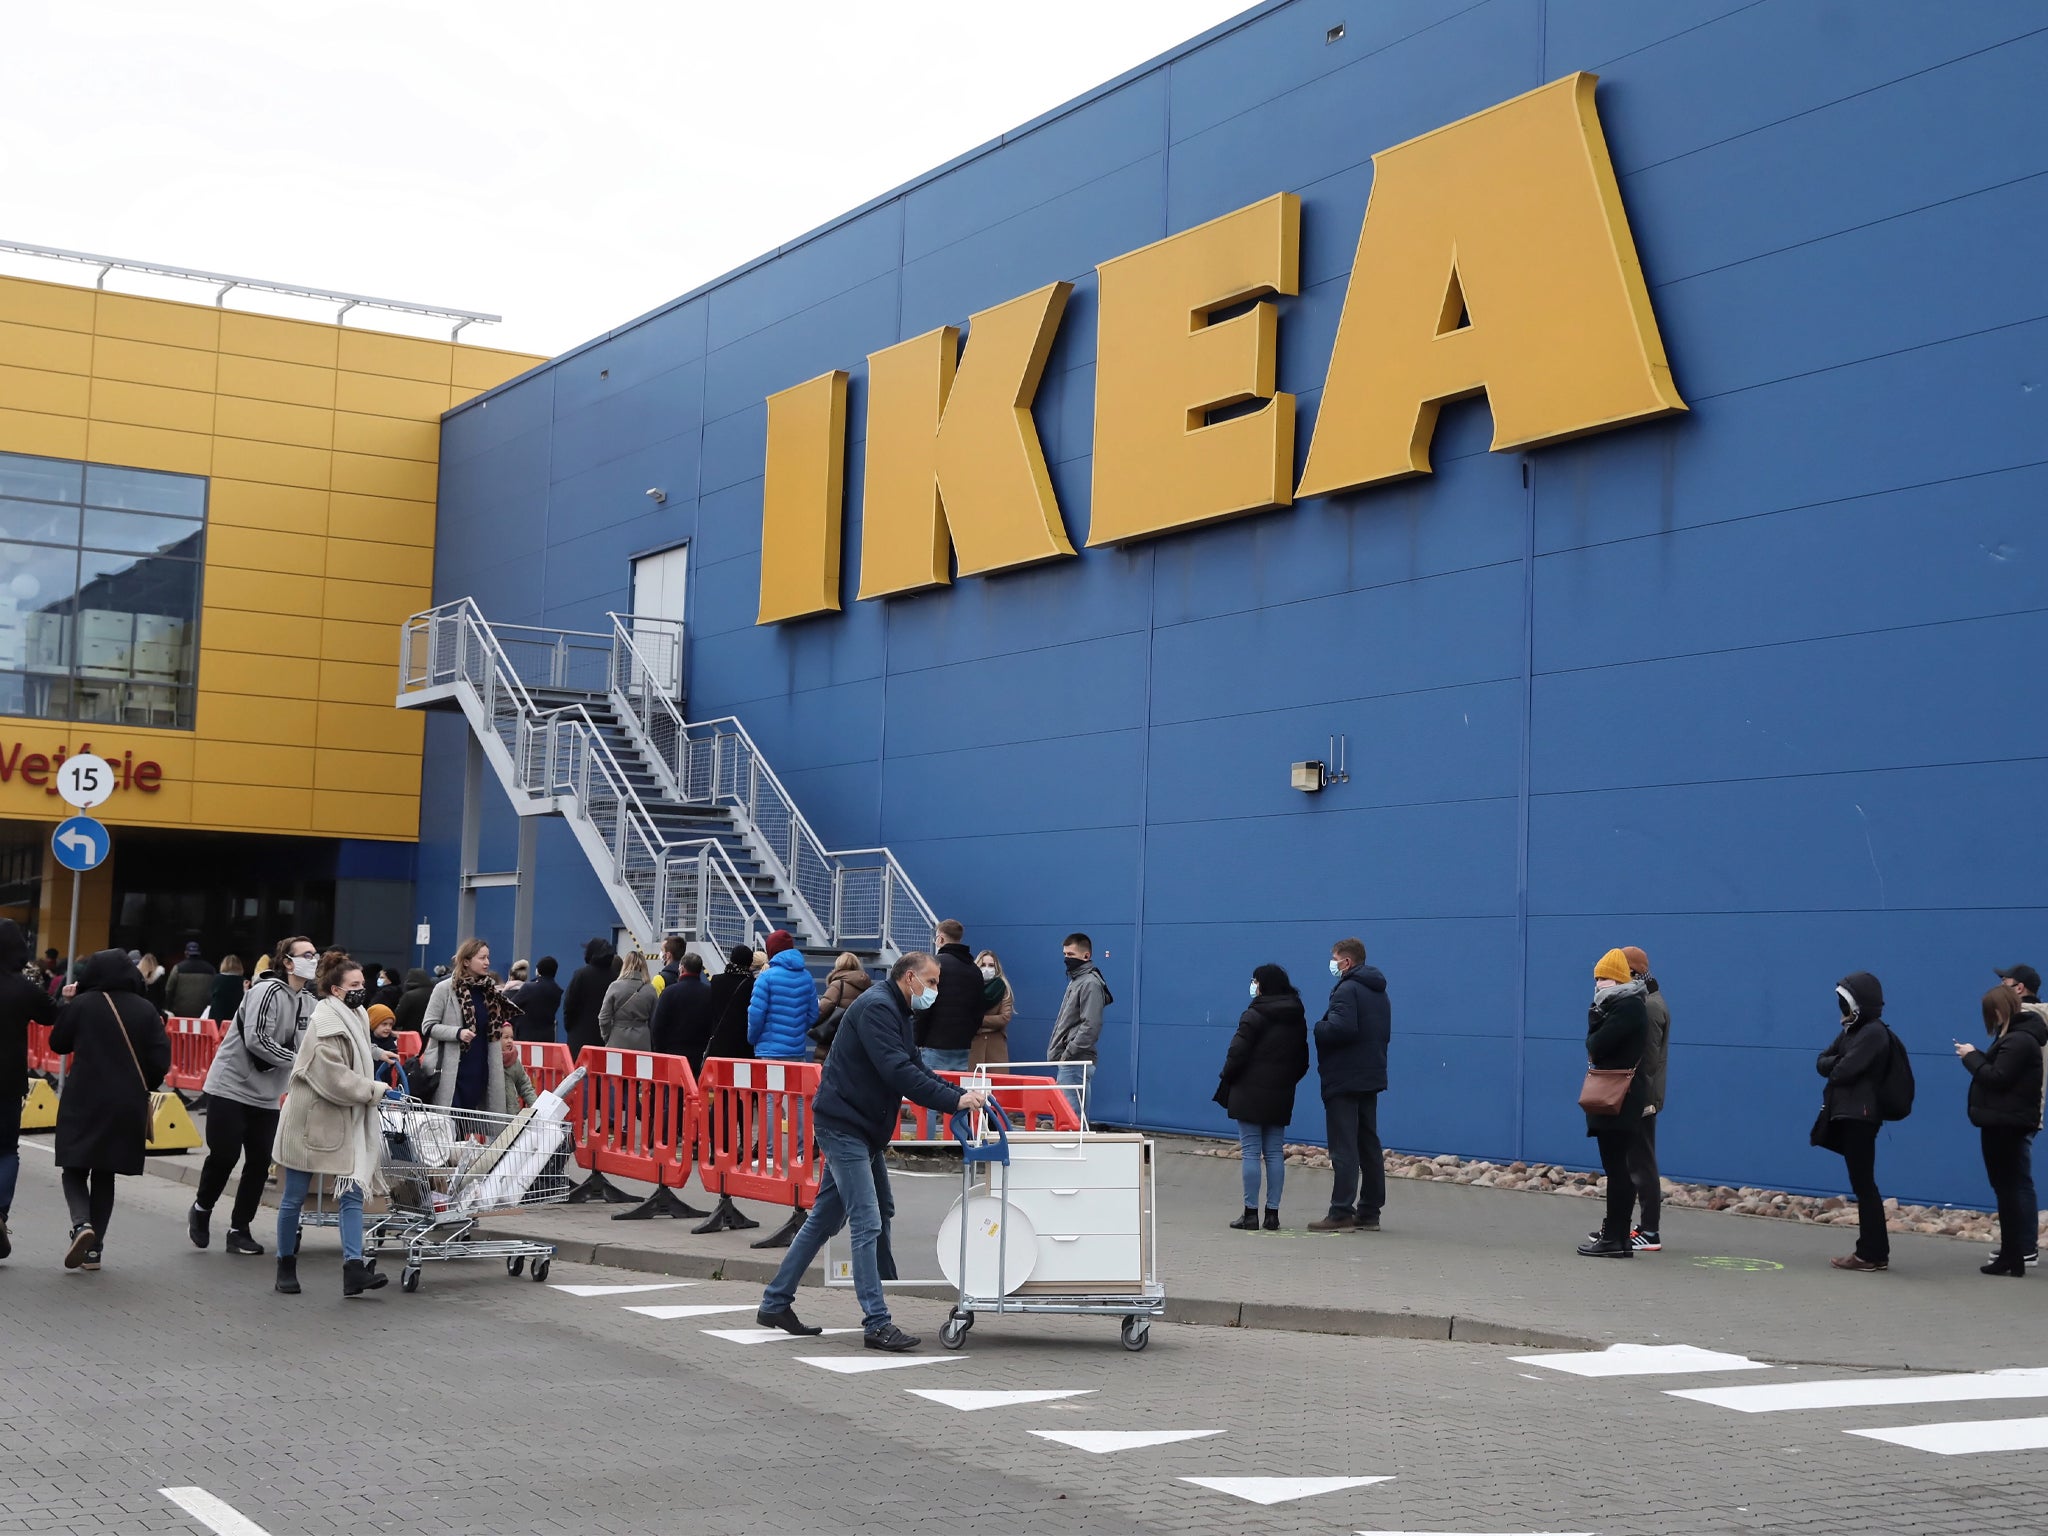 Customers took to Twitter to complain of delays in their orders, missing parts and inability to reach the Ikea helpline